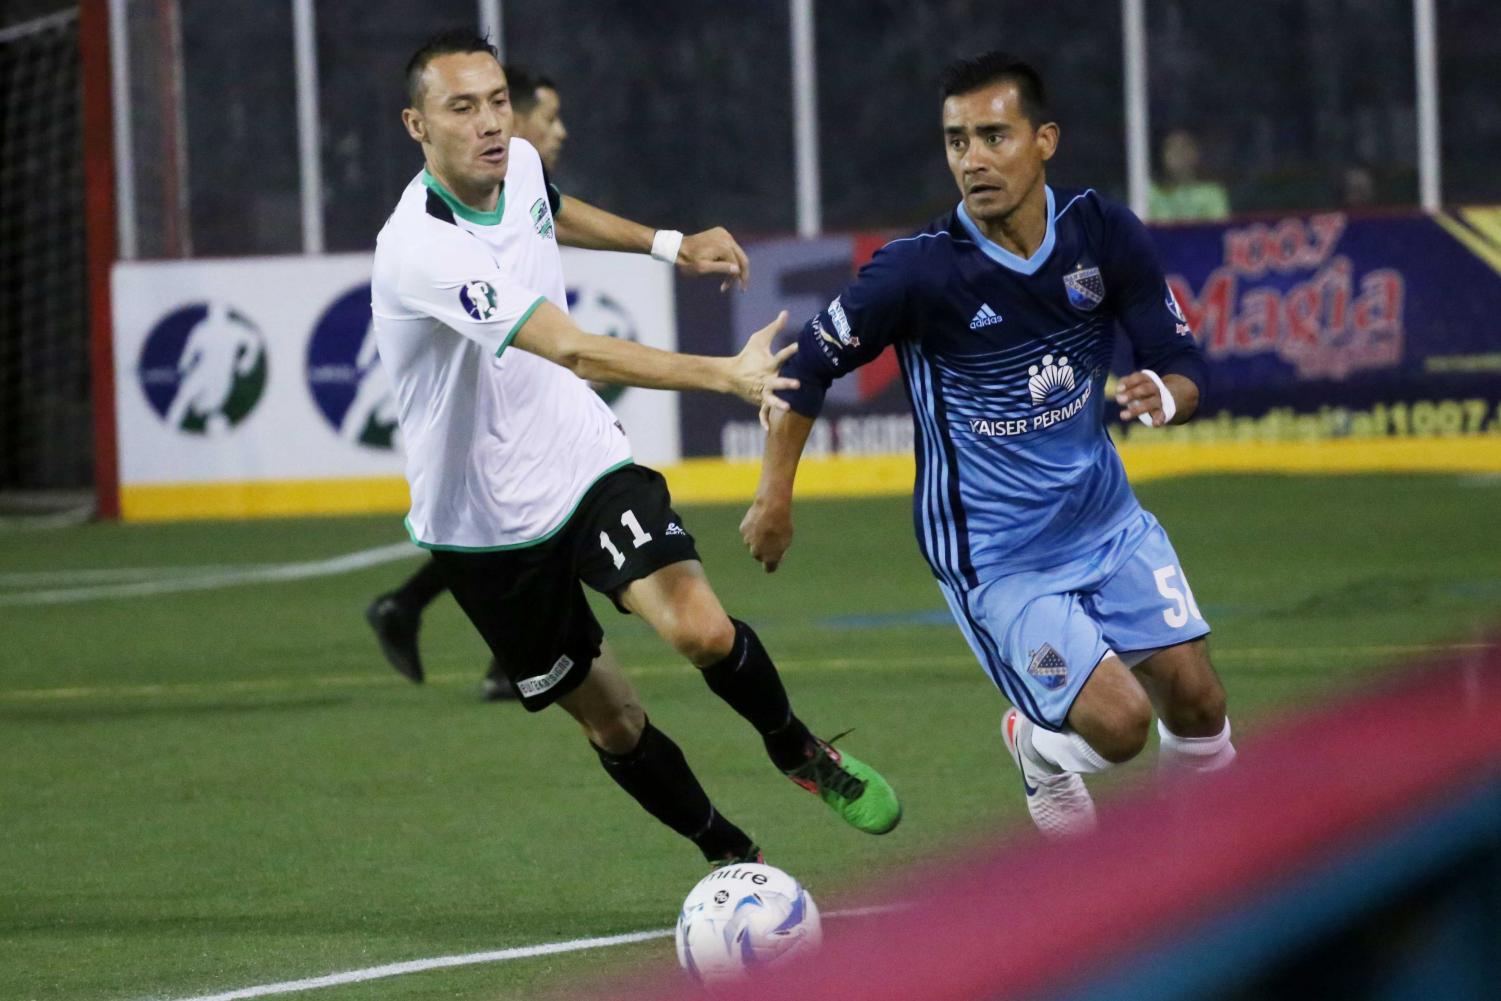 Coyotes+fall+to+Sockers+9-5+after+securing+first+franchise+win